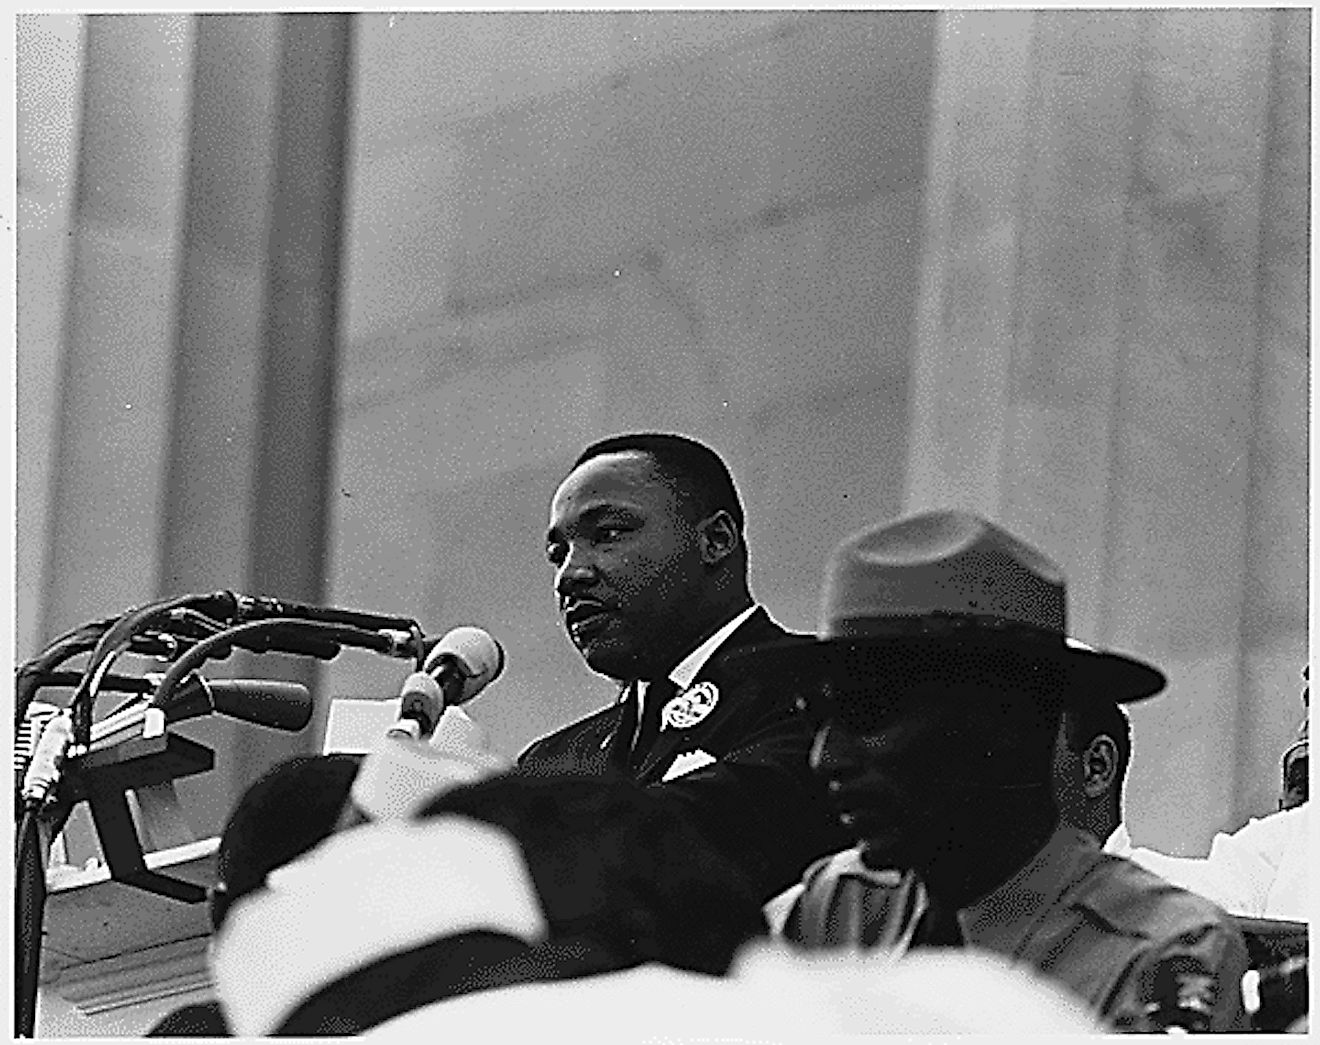 Civil Rights March on Washington, D.C. [Dr. Martin Luther King, Jr. speaking], 08/28/1963. Image credit: The U.S. National Archives/Flickr.com